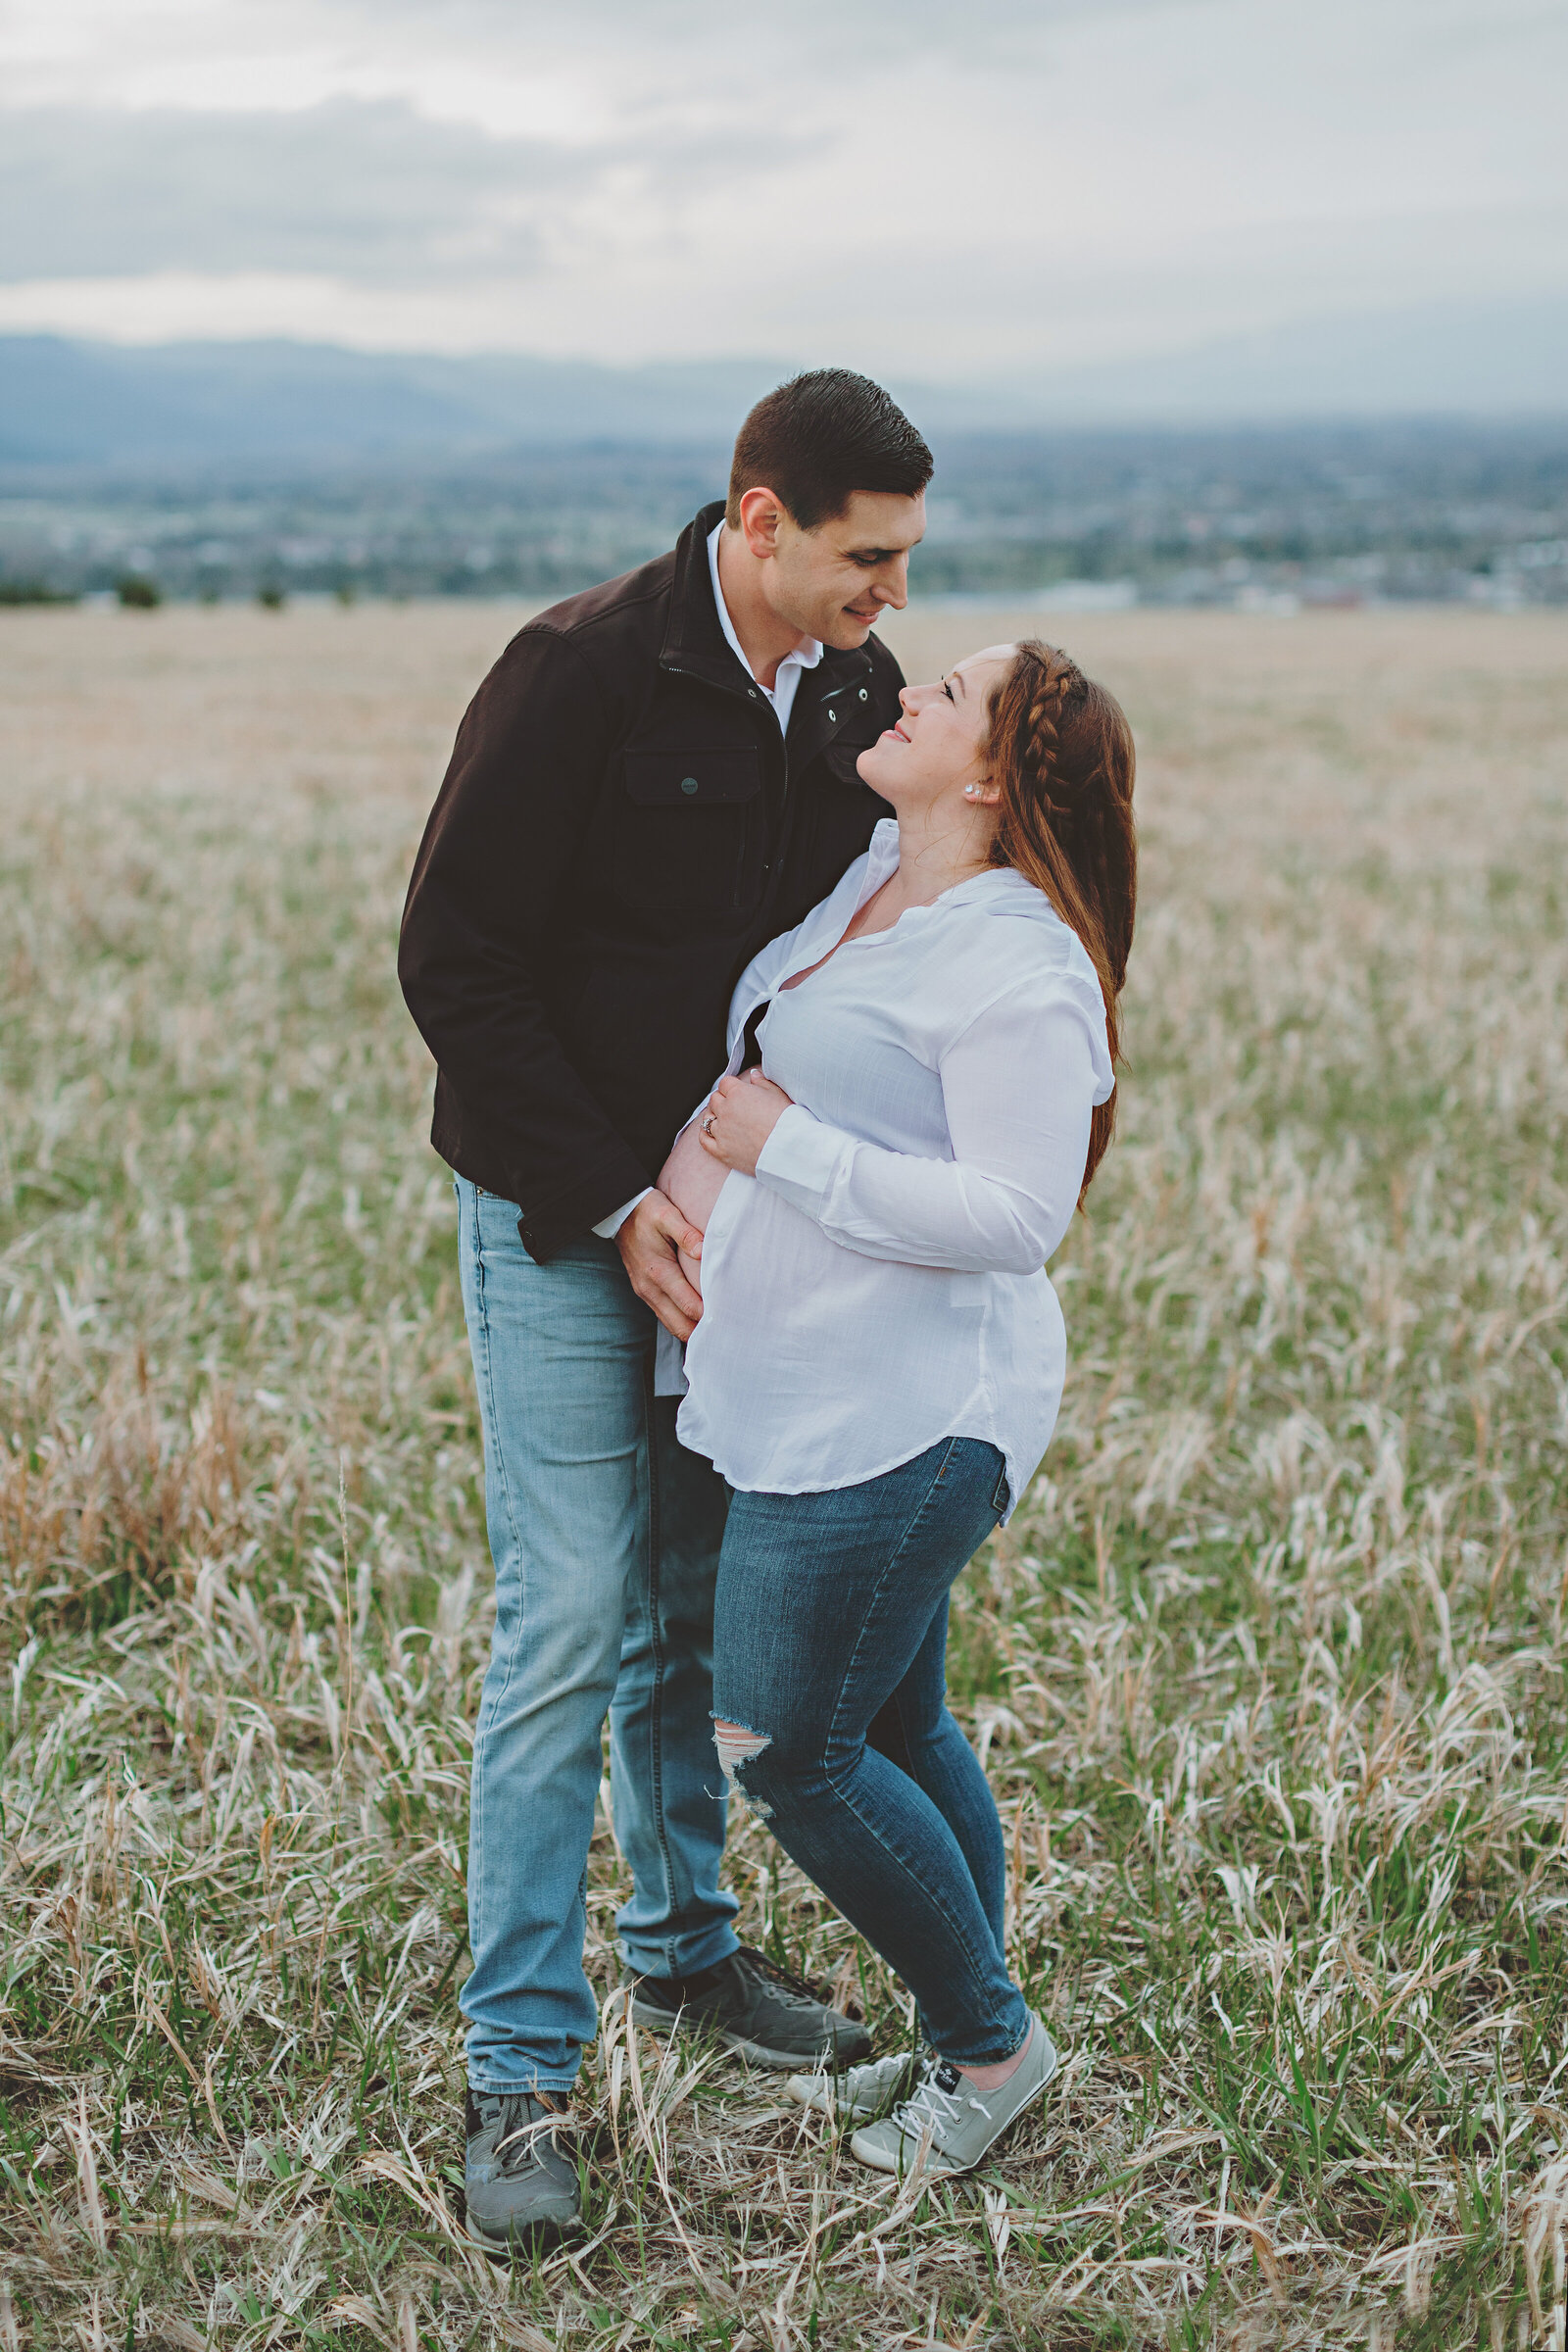 Wendy Parrish Photography is a Missoula family photographer specializing in newborn, maternity, family and seniors serving Missoula, Great Falls, The Bitterroot Valley and the surrounding areas